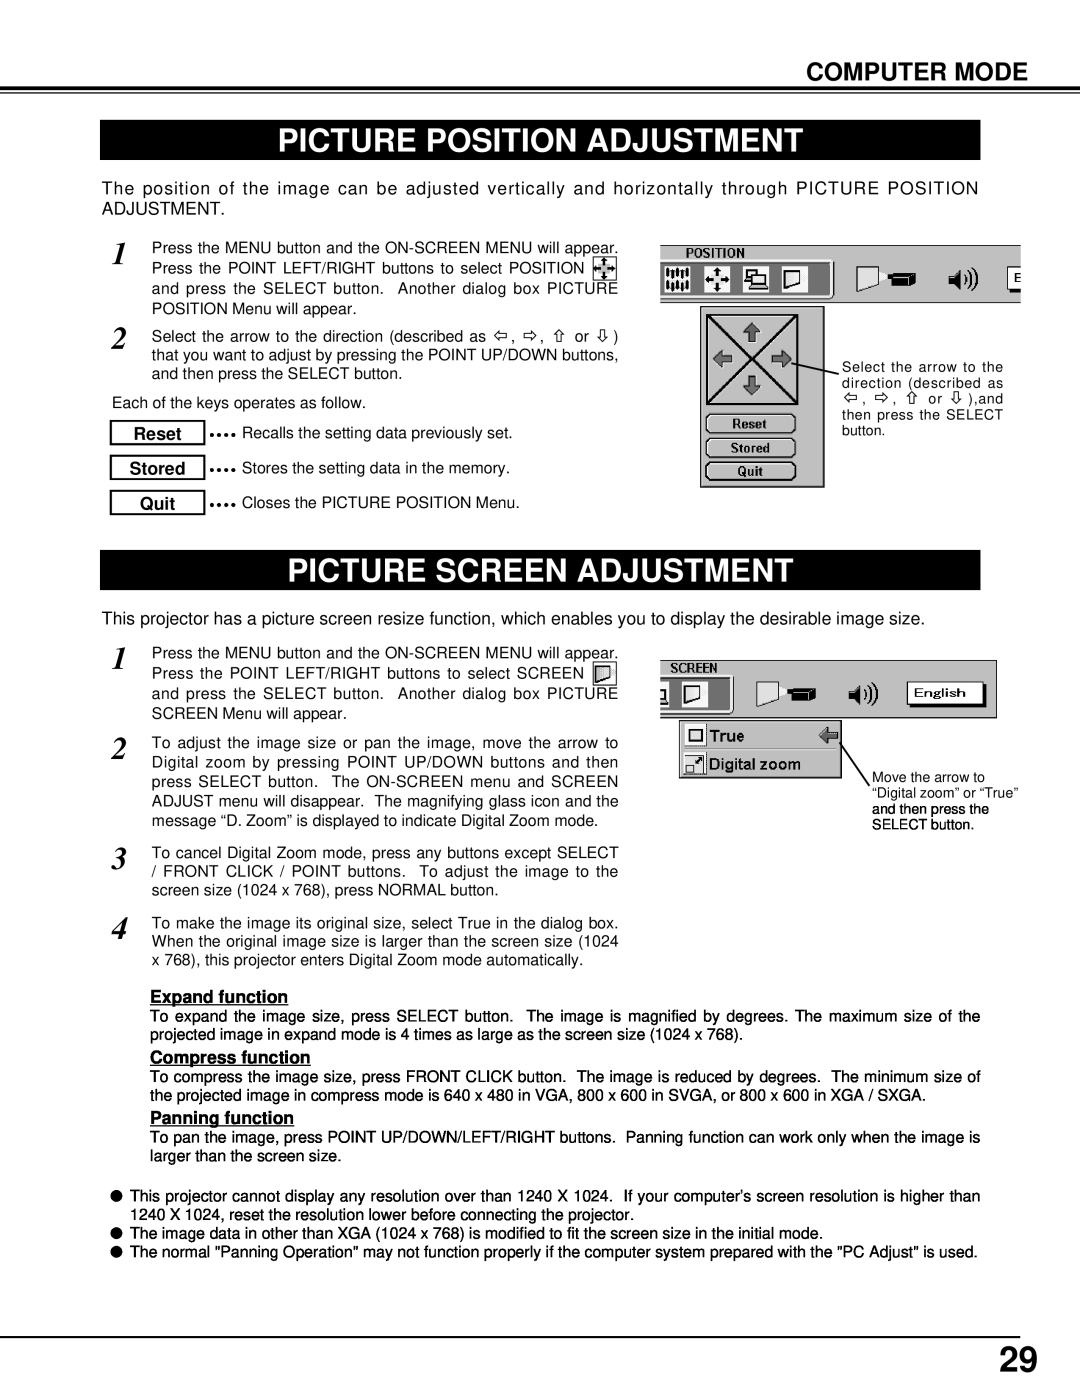 BOXLIGHT CP-14t manual Picture Position Adjustment, Picture Screen Adjustment, Computer Mode 